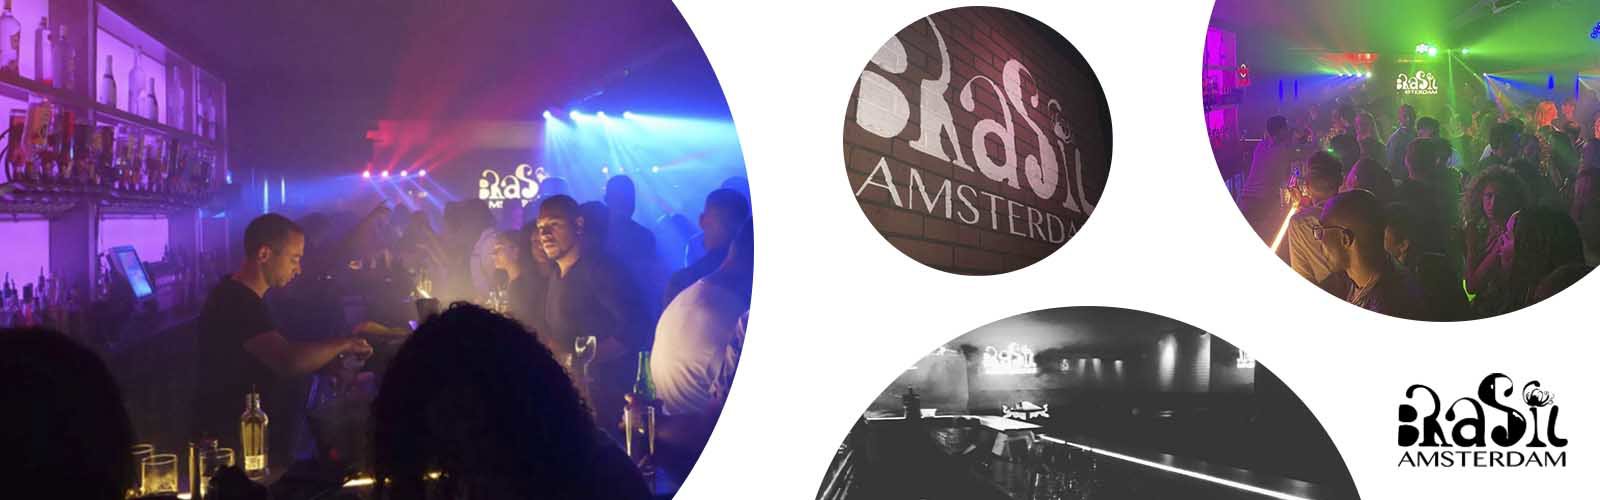 10 Best Clubs In Amsterdam, Netherlands To Dance The Night Away